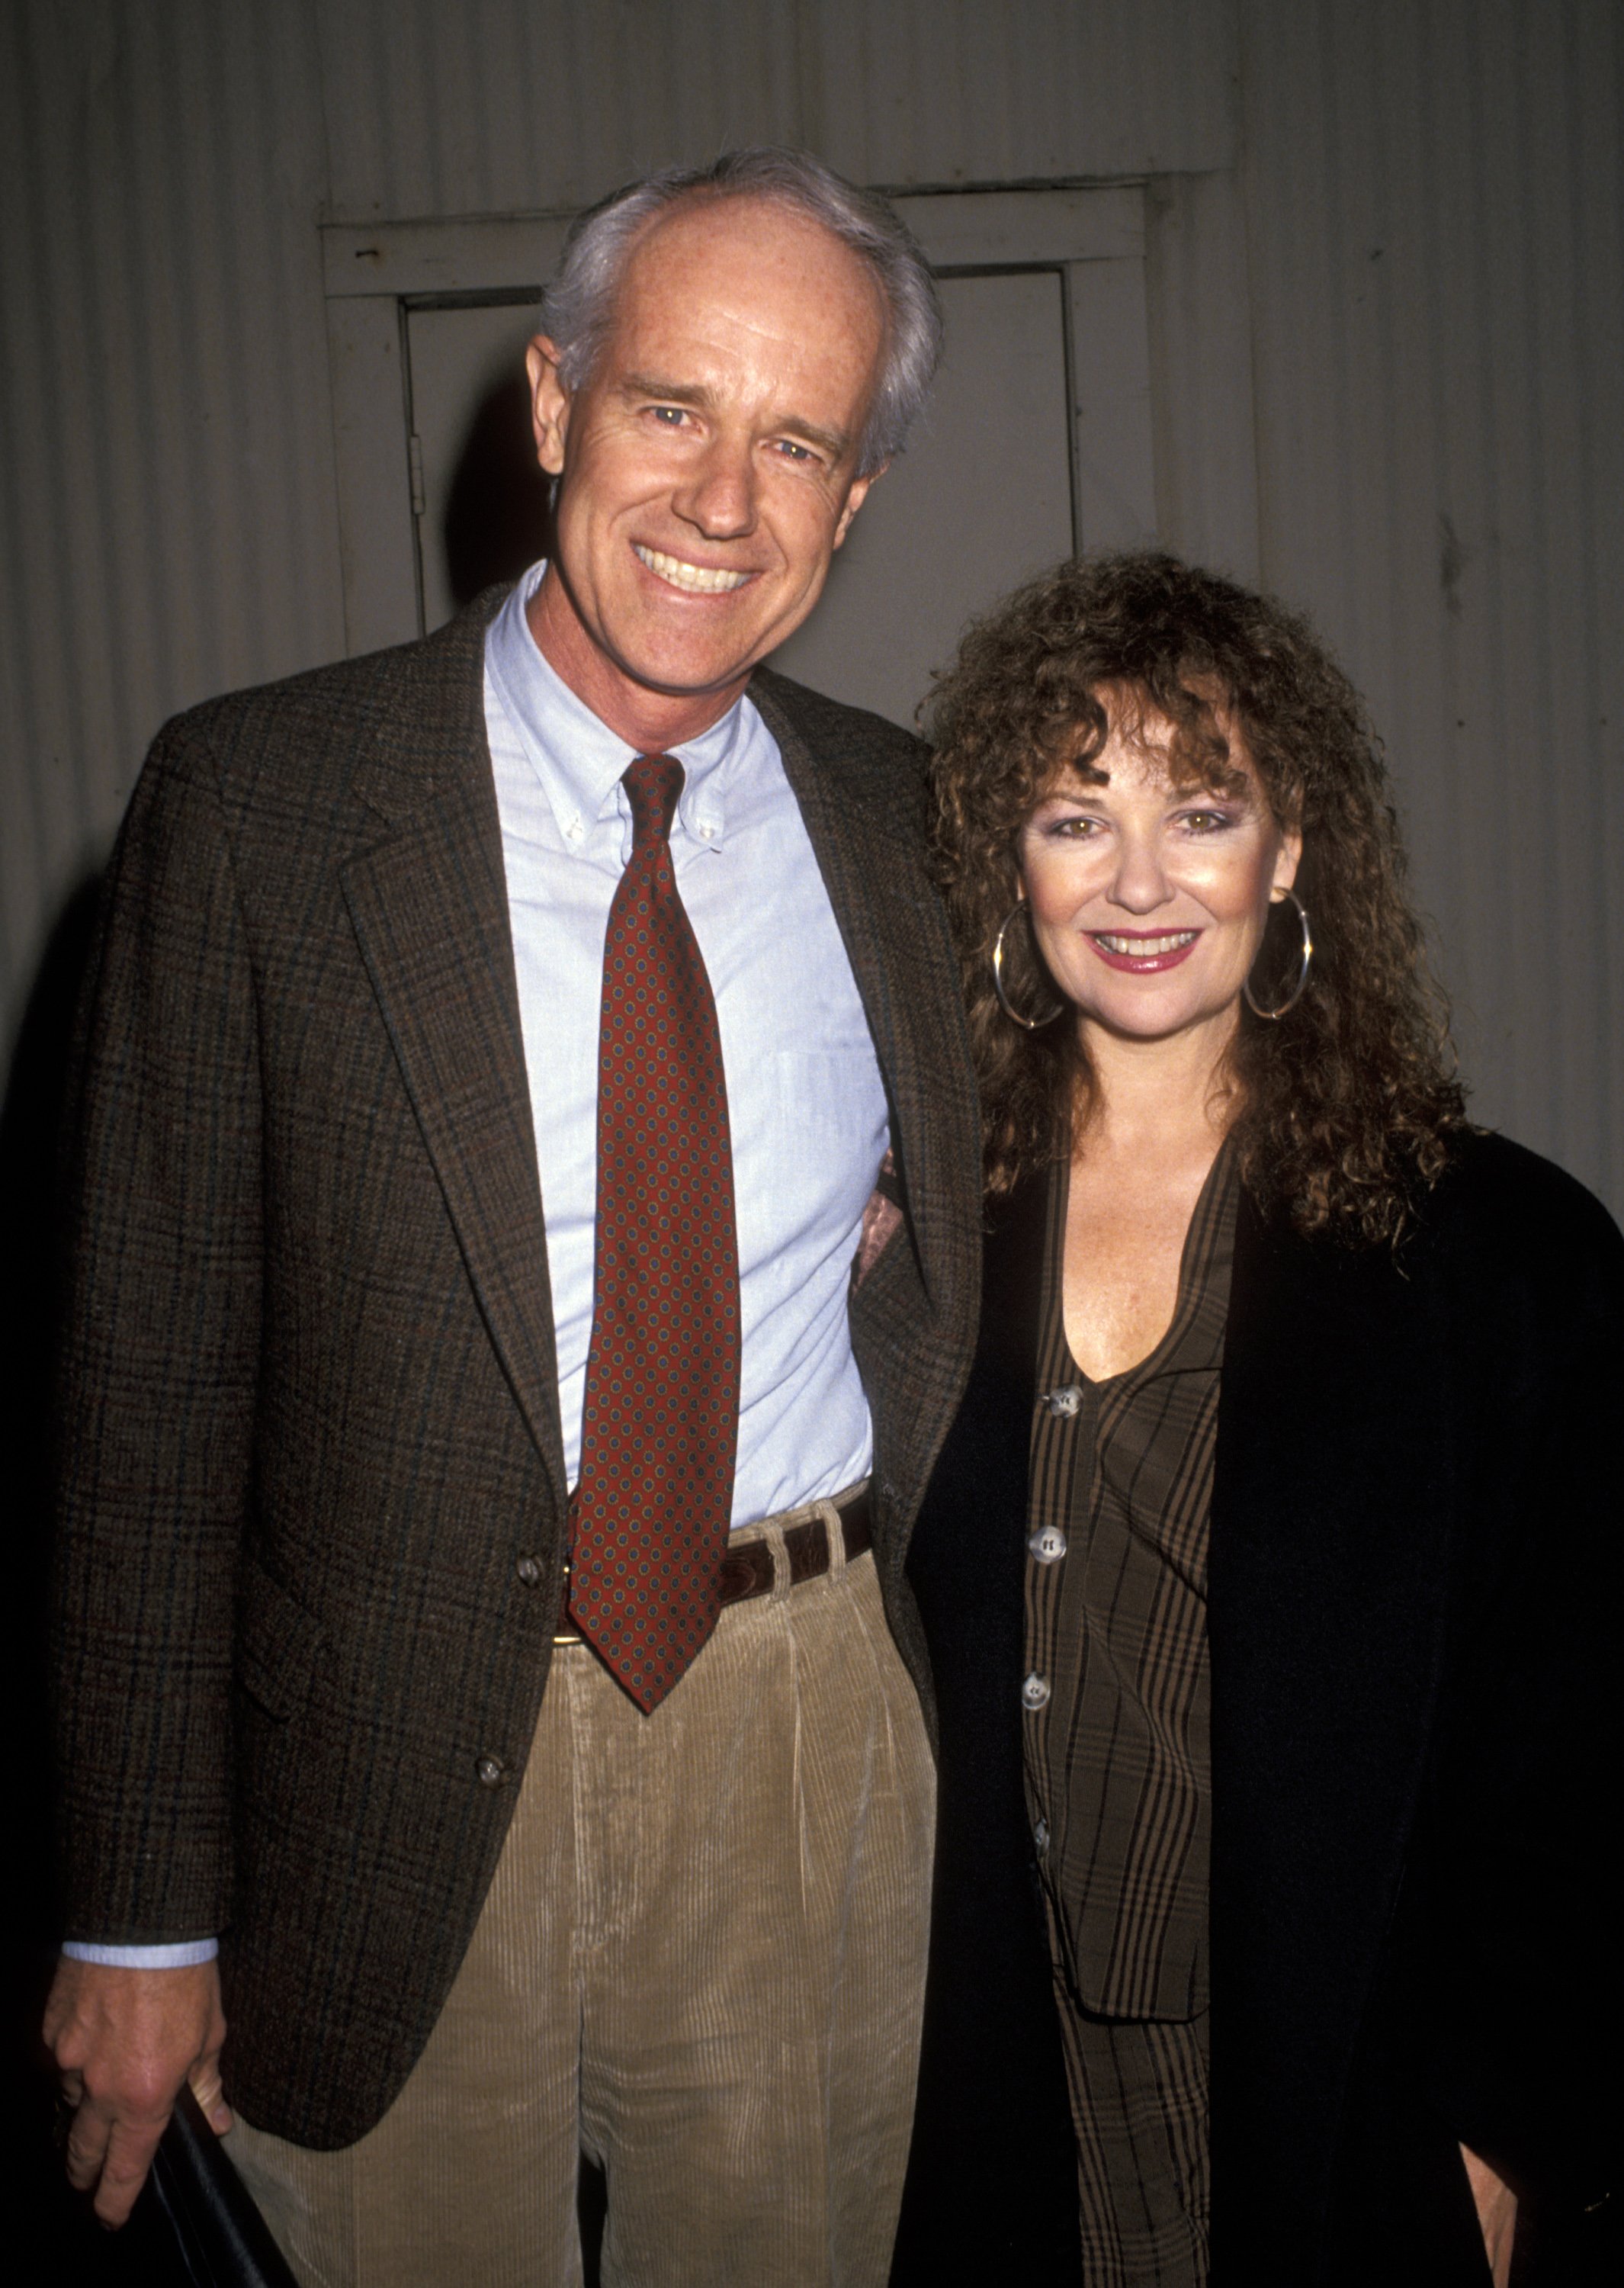 Mike Farrell and Shelley Fabares attend the Oxfam Hunger Banquet at Sony Studios on November 21, 1991 in Culver City, California. | Source: Getty Images